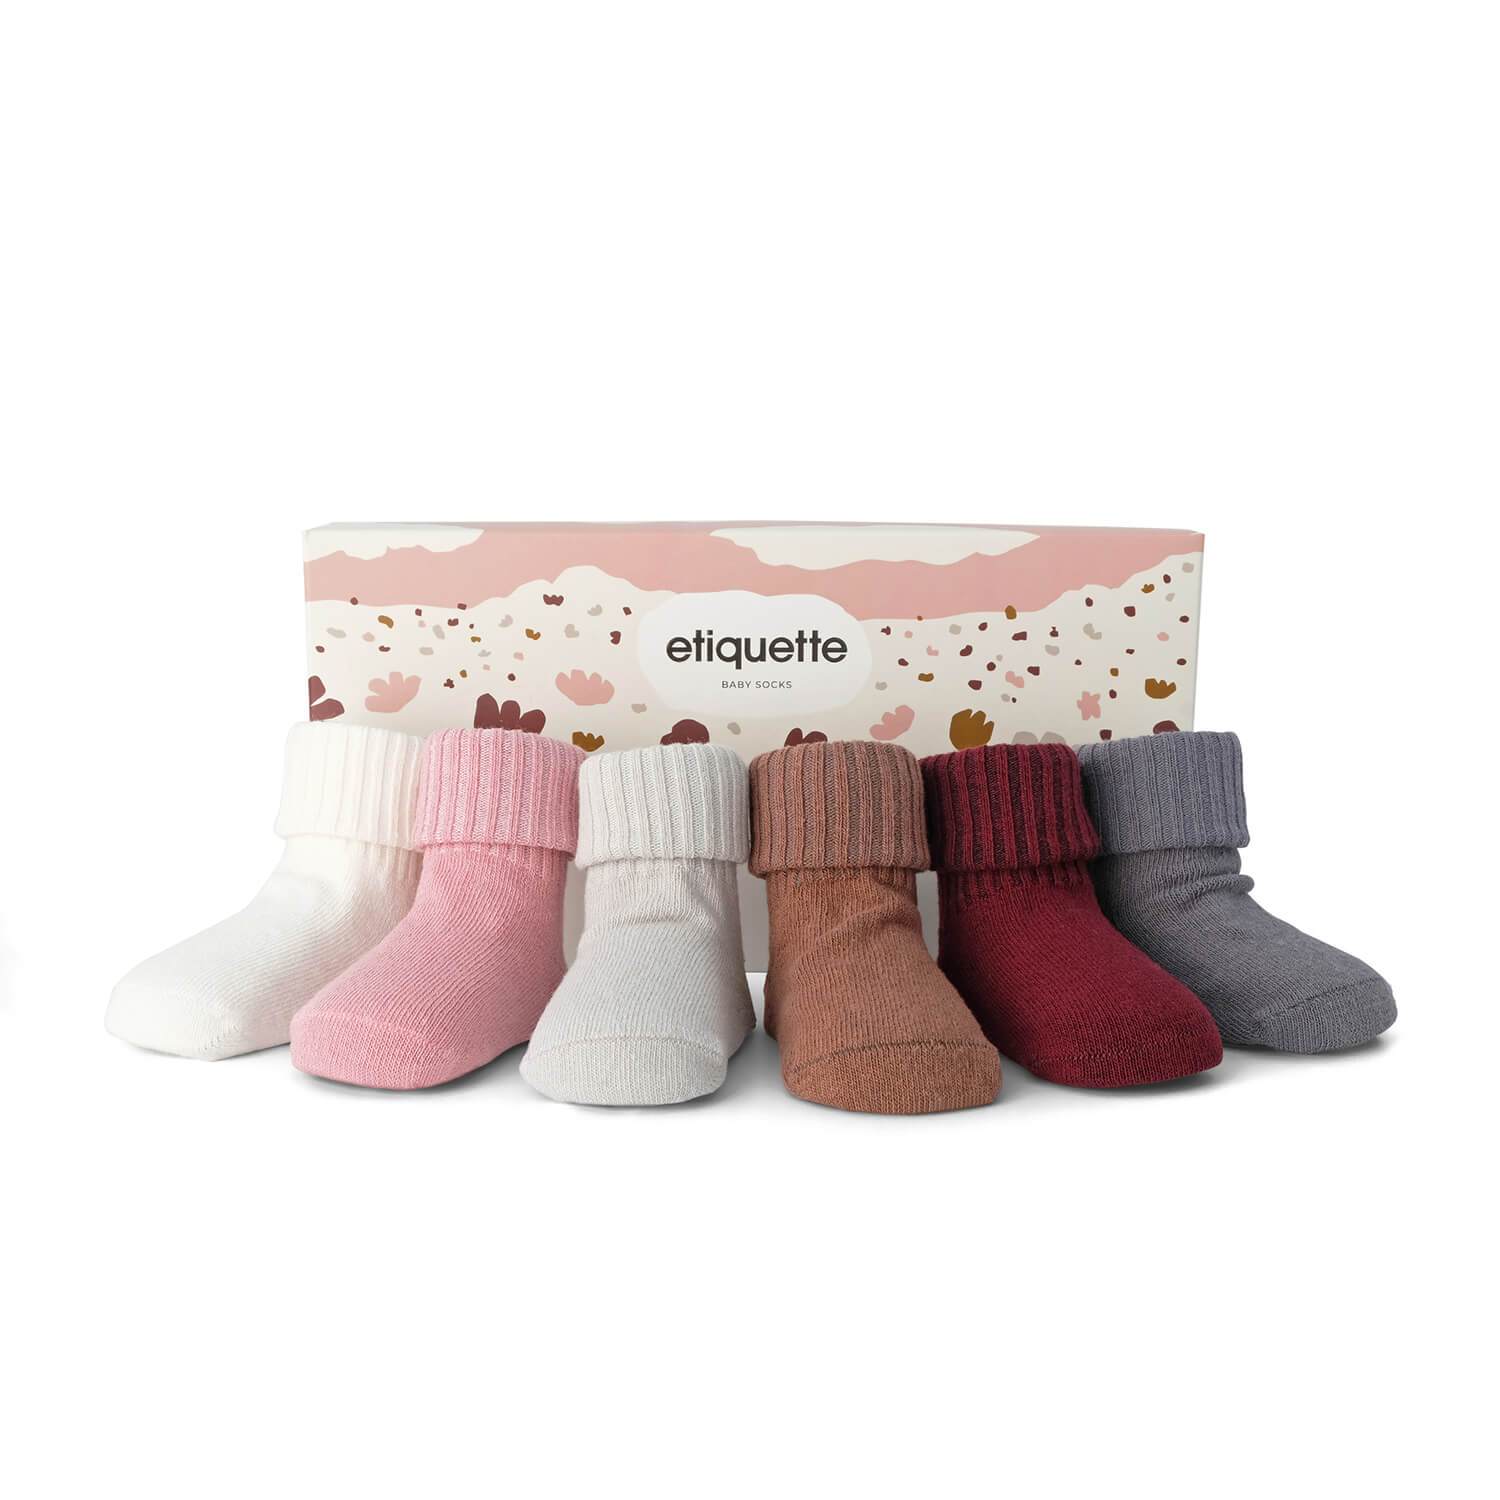 Organic Baby Socks - Everbloom Girl Baby Socks Gift Box - pink bordeaux, grey - main view⎪Lil'Etiquette Clothiers